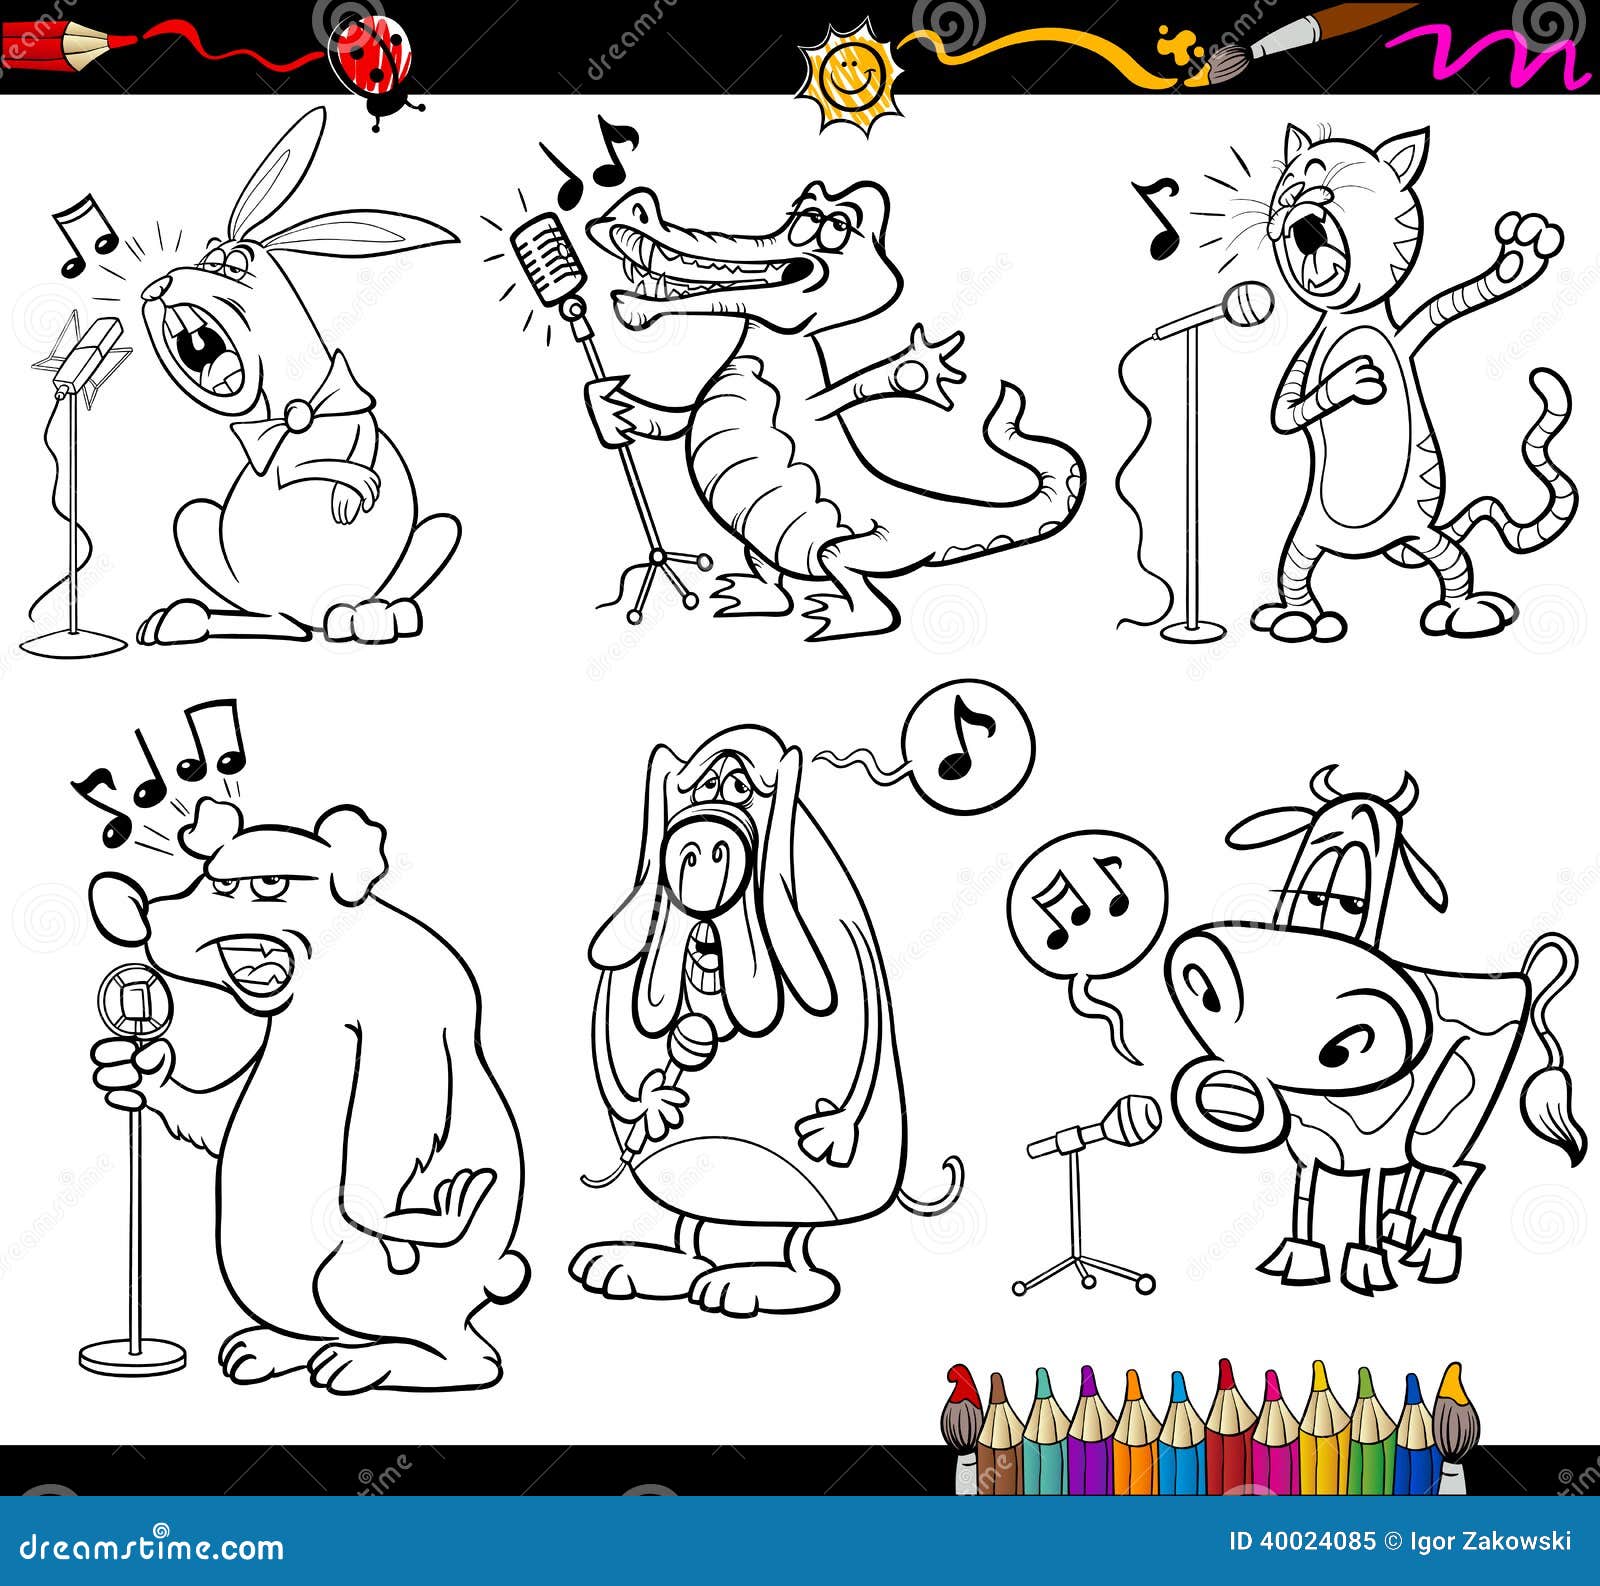 Download Singing Animals Set For Coloring Book Stock Vector - Image: 40024085